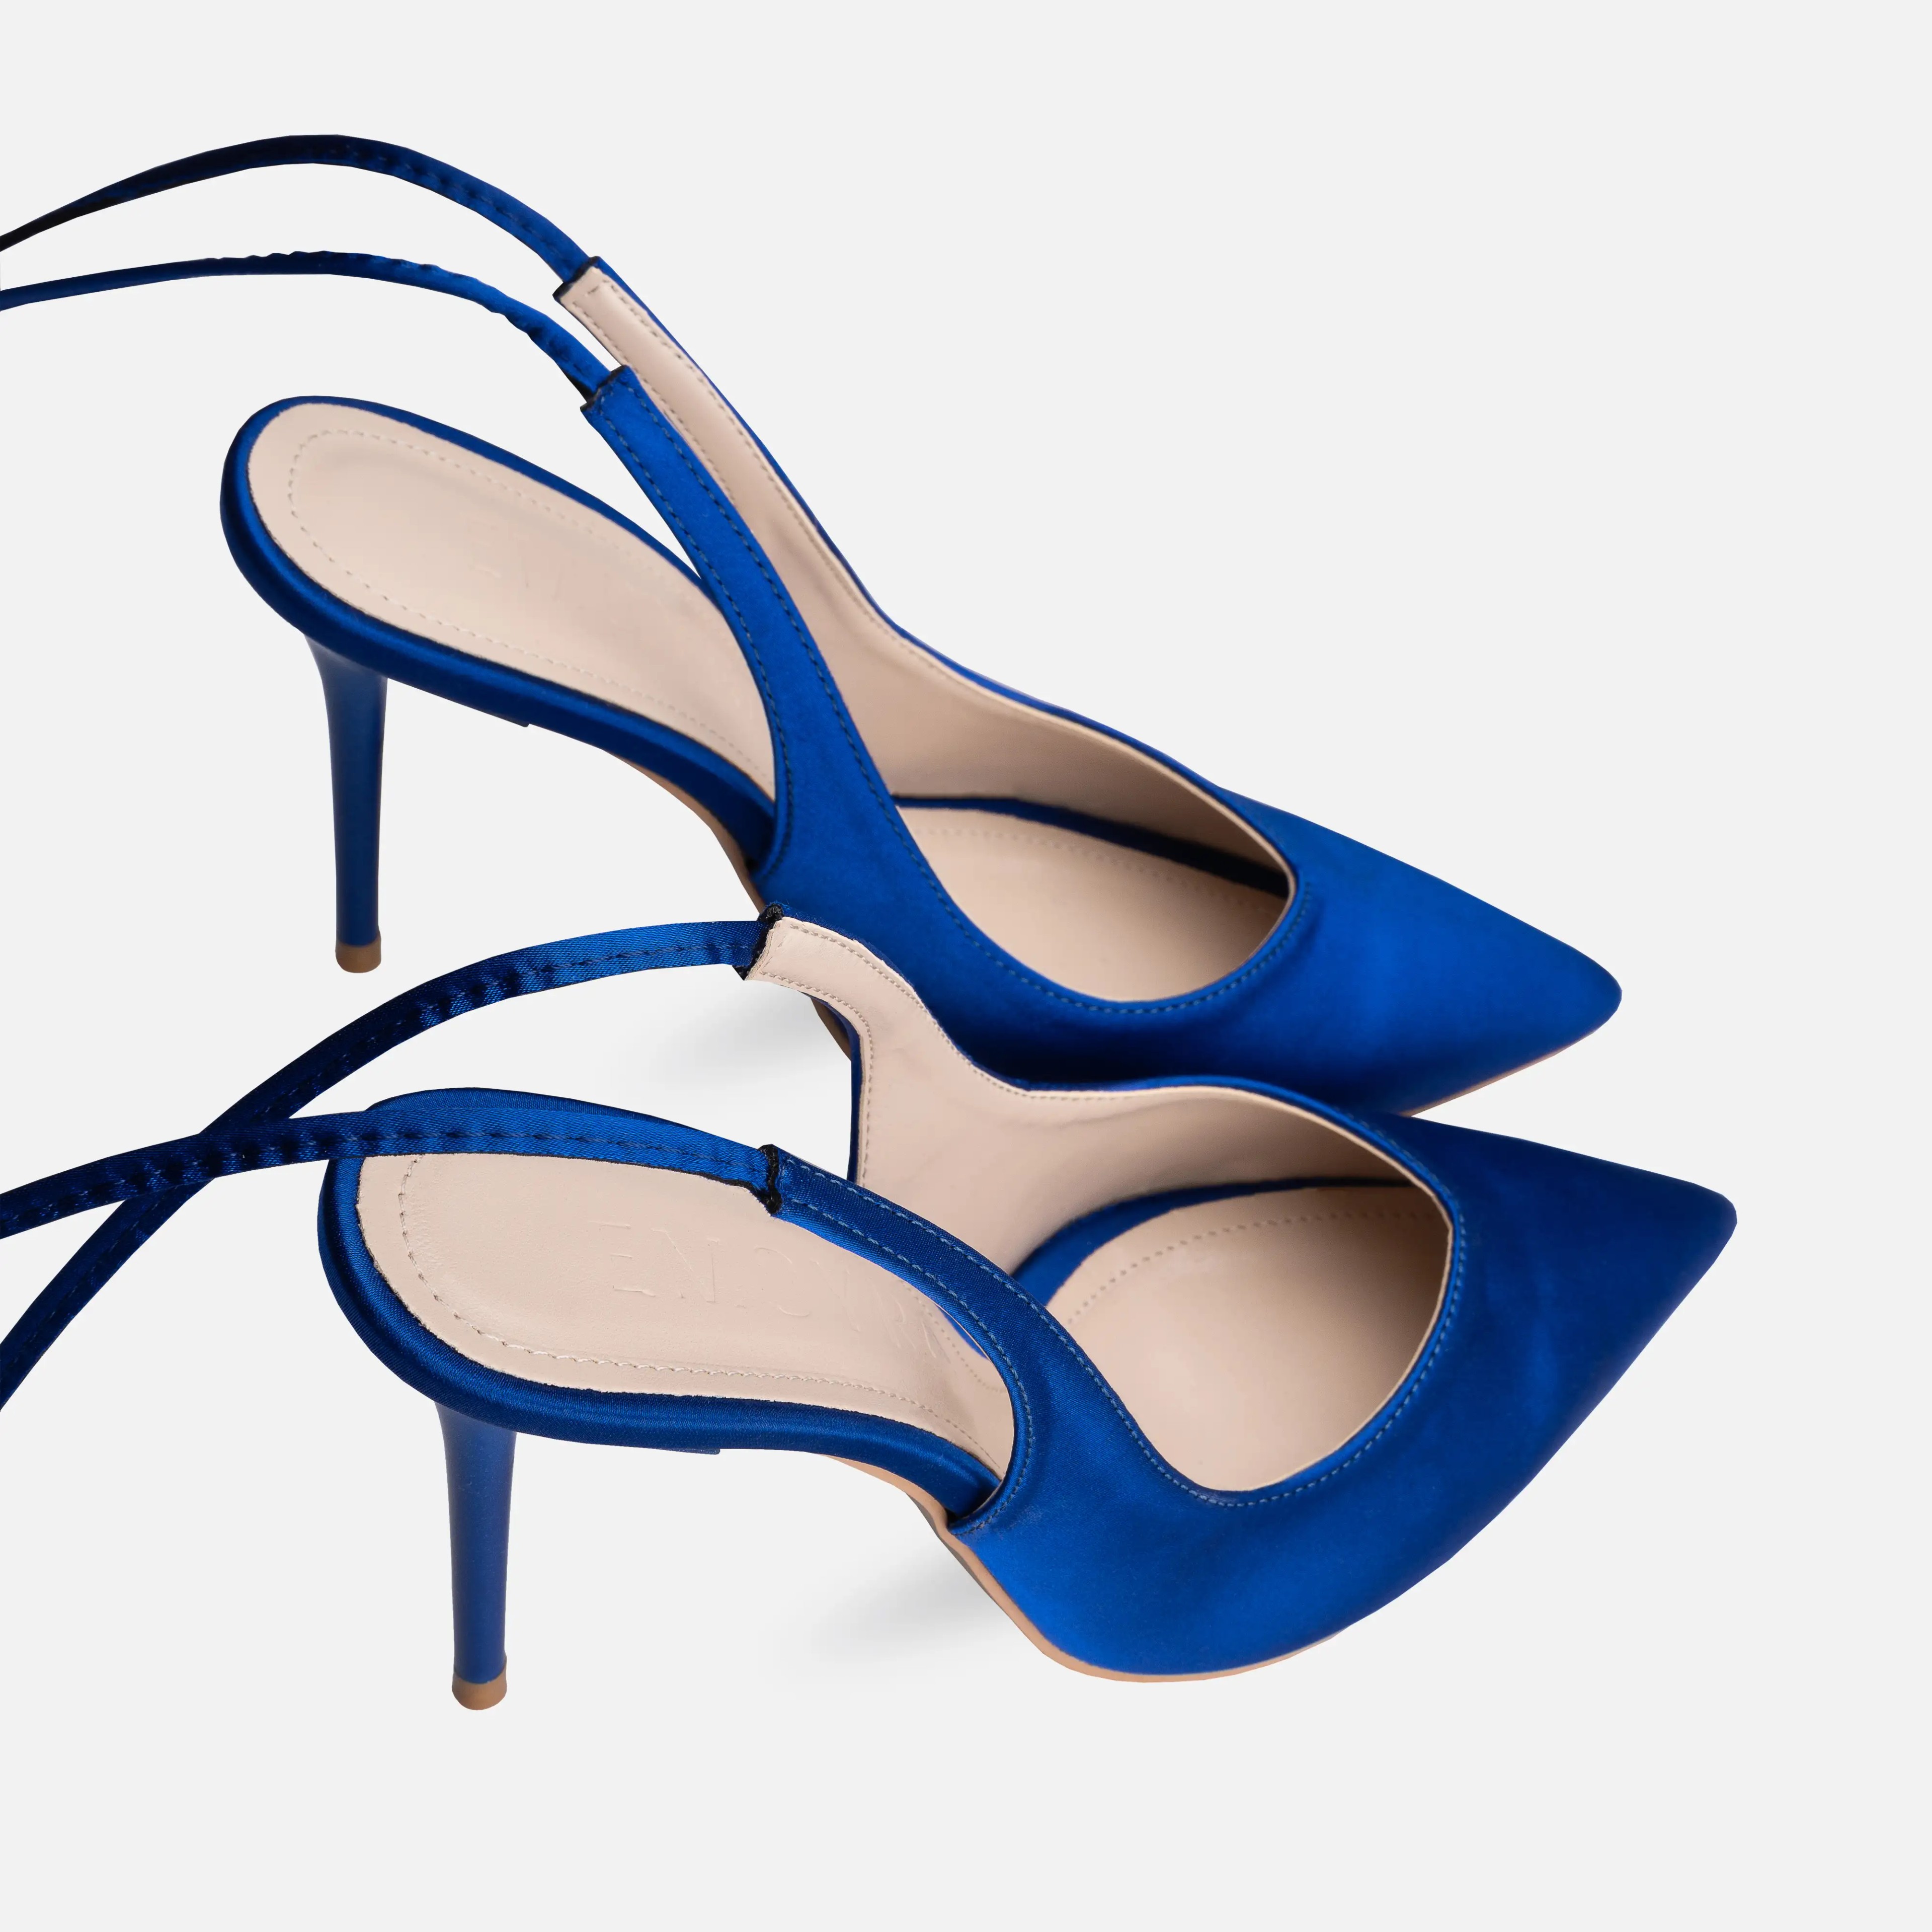 Satin Lace-up Thin High-Heeled Pumps - Blue